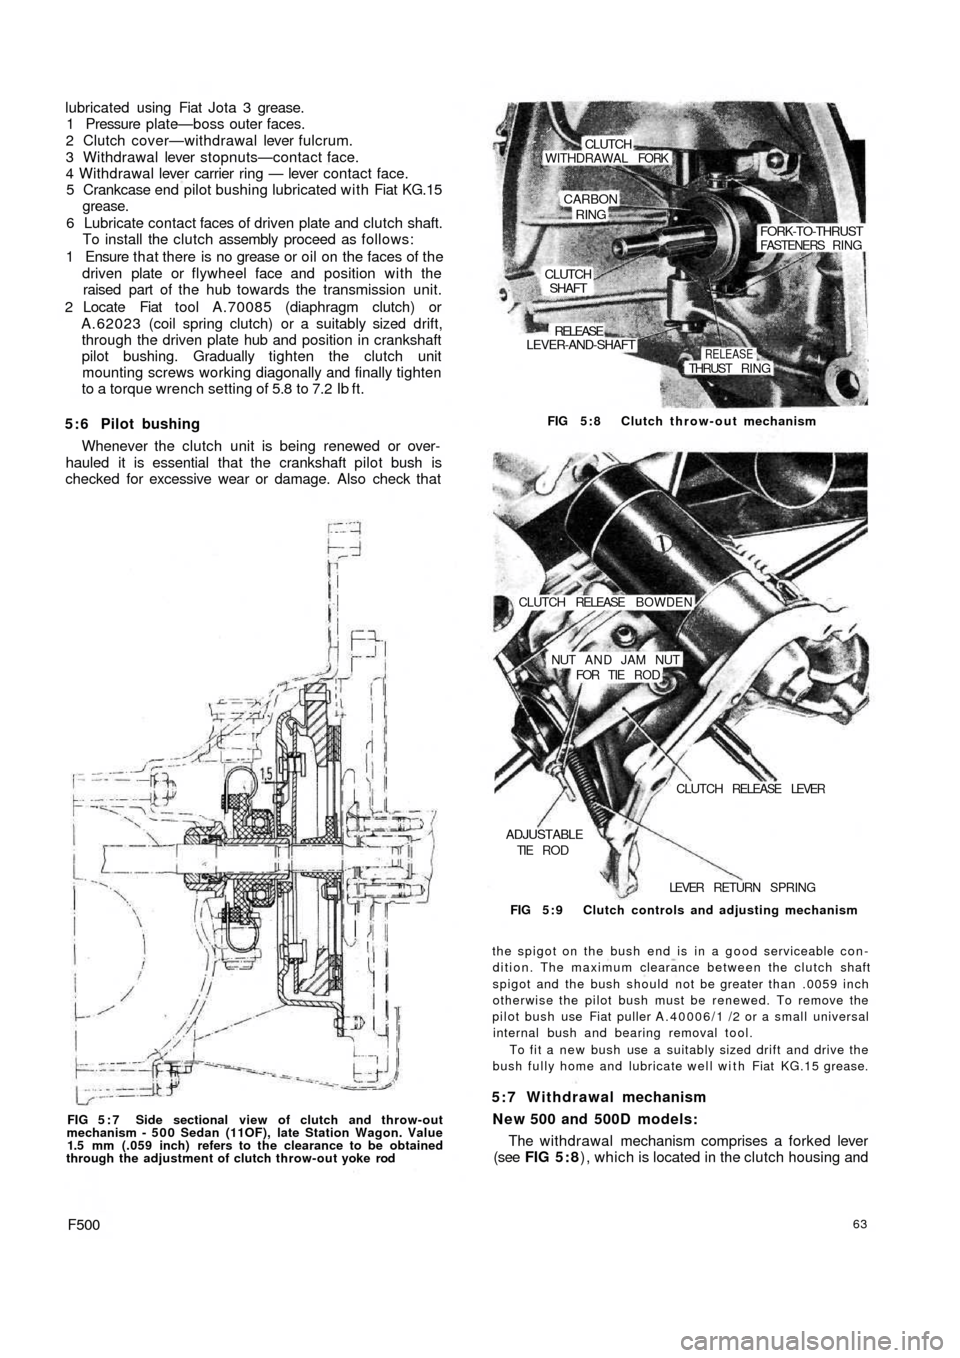 FIAT 500 1958 1.G Workshop Manual lubricated using Fiat Jota 3 grease.
1 Pressure plate—boss outer faces.
2 Clutch cover—withdrawal lever fulcrum.
3 Withdrawal lever stopnuts—contact face.
4 Withdrawal lever carrier ring — lev